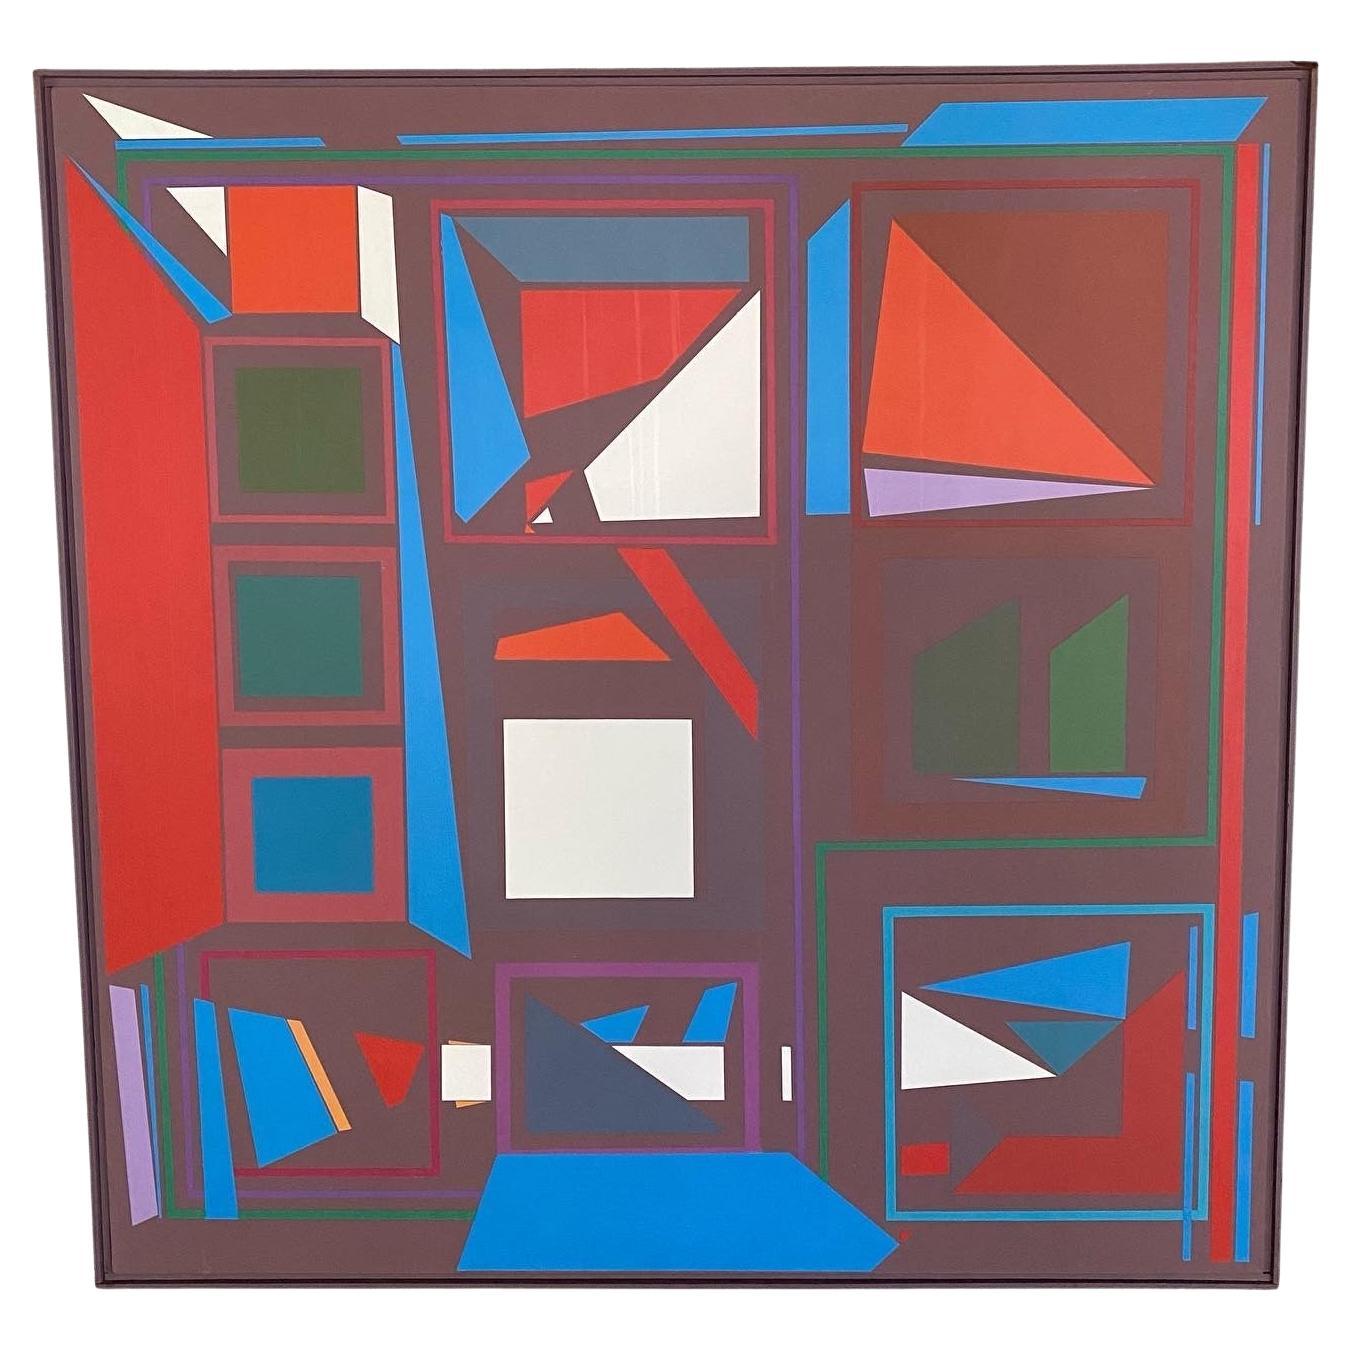 Midcentury Modern Geometric Abstract Oil on Canvas Painting by Gerald Takacs